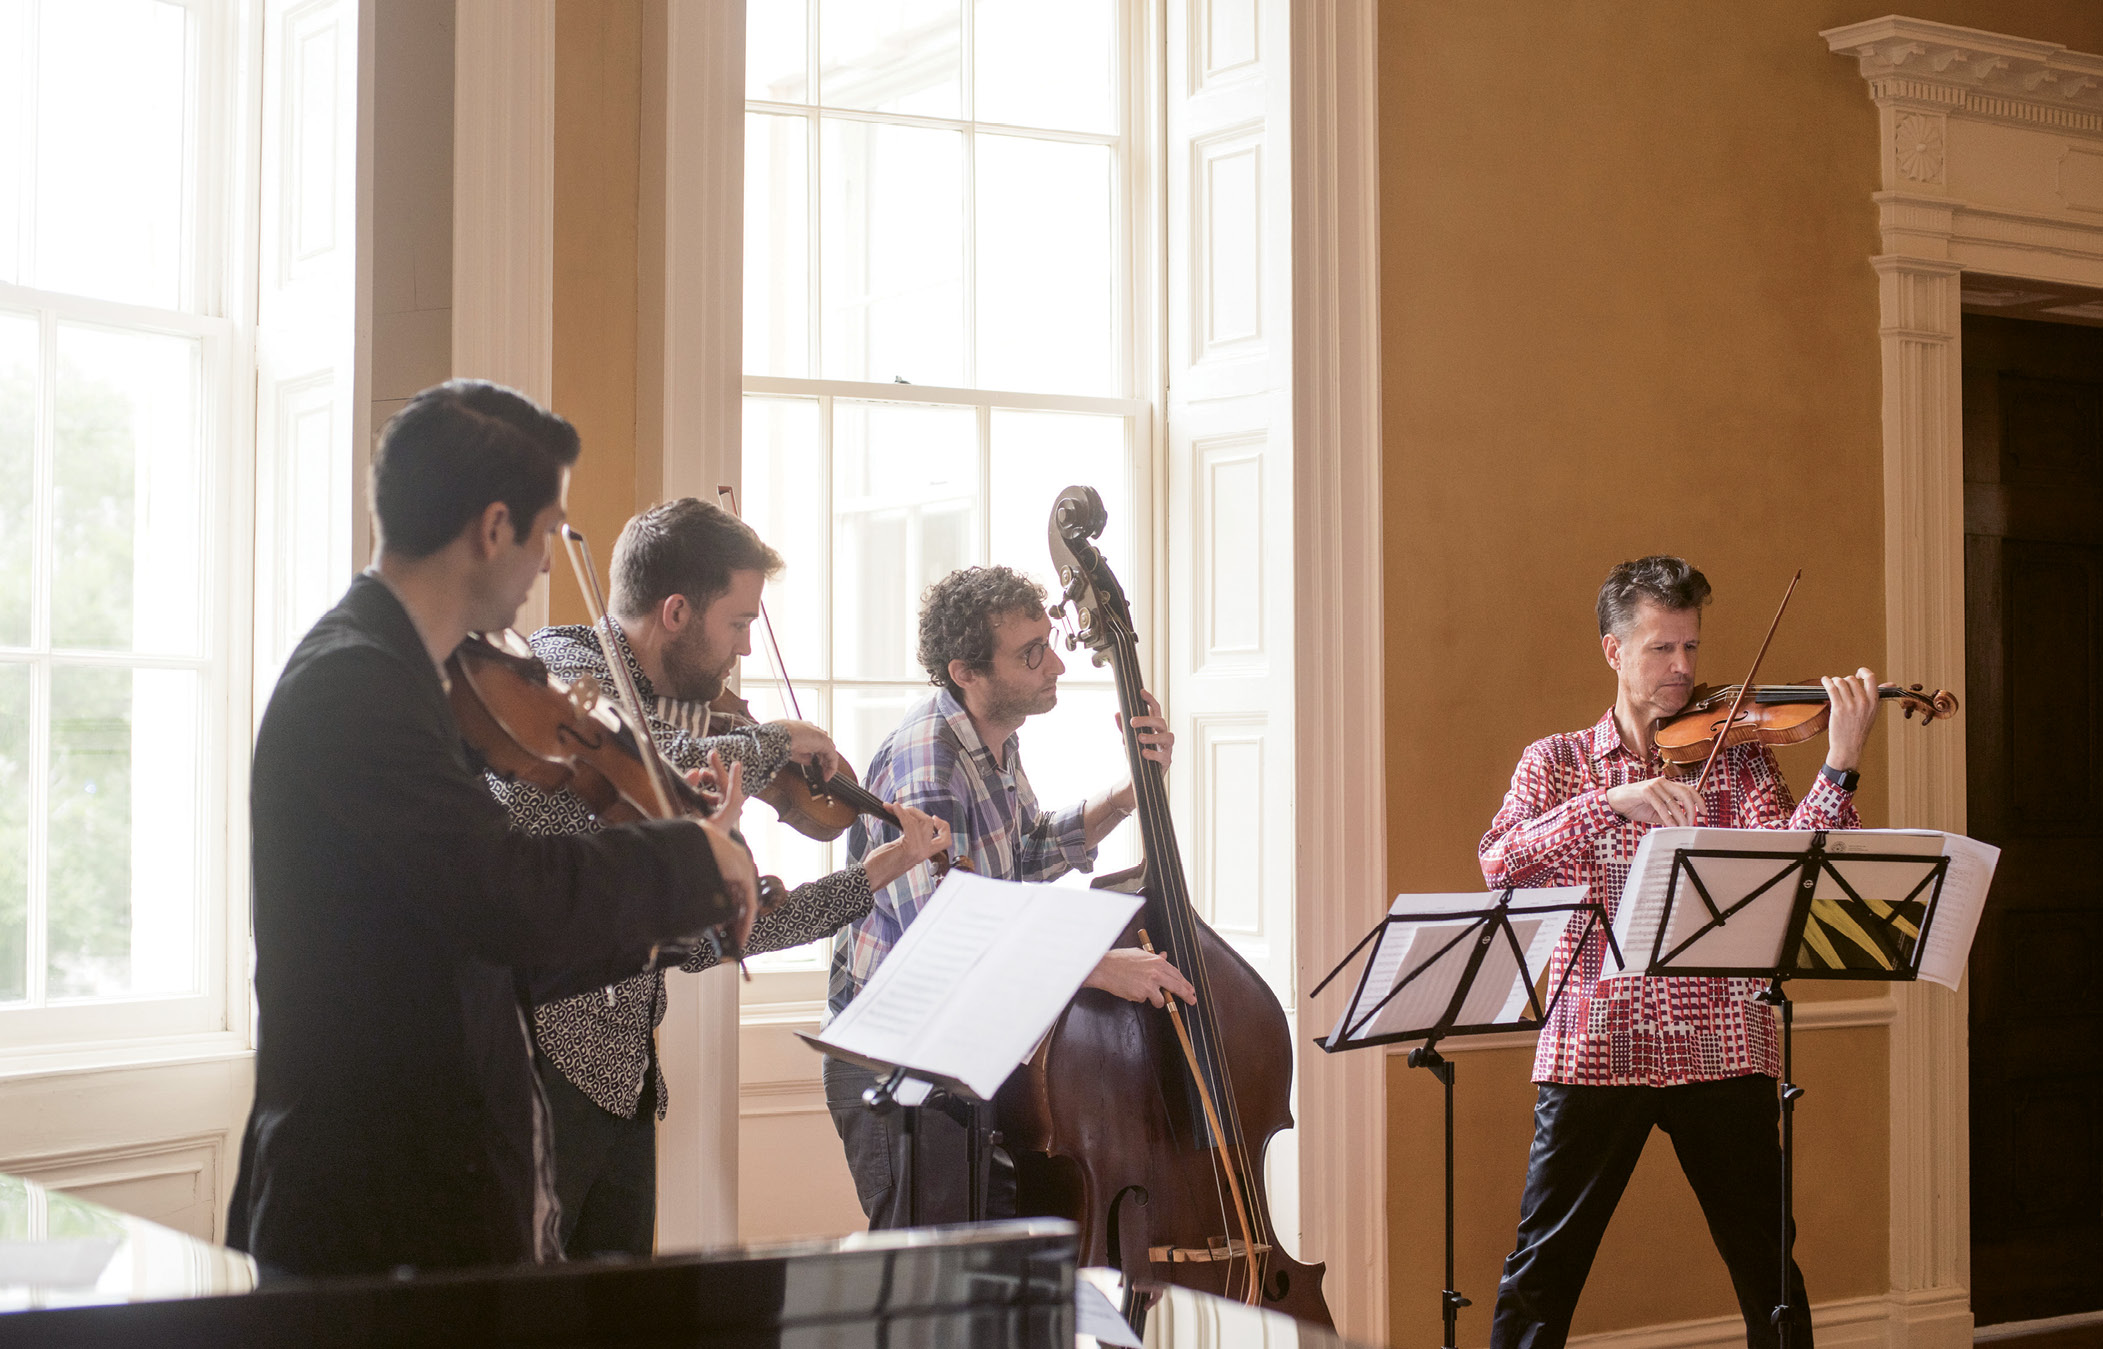 5 p.m.  Practice Makes Perfect: Grammy-winning violist Masumi Per Rostad; St. Lawrence String Quartet violinist Owen Dalby; and bassist, composer, and Juilliard faculty member Doug Balliett rehearse with Nuttall at Spoleto headquarters before a special donor party and concert.